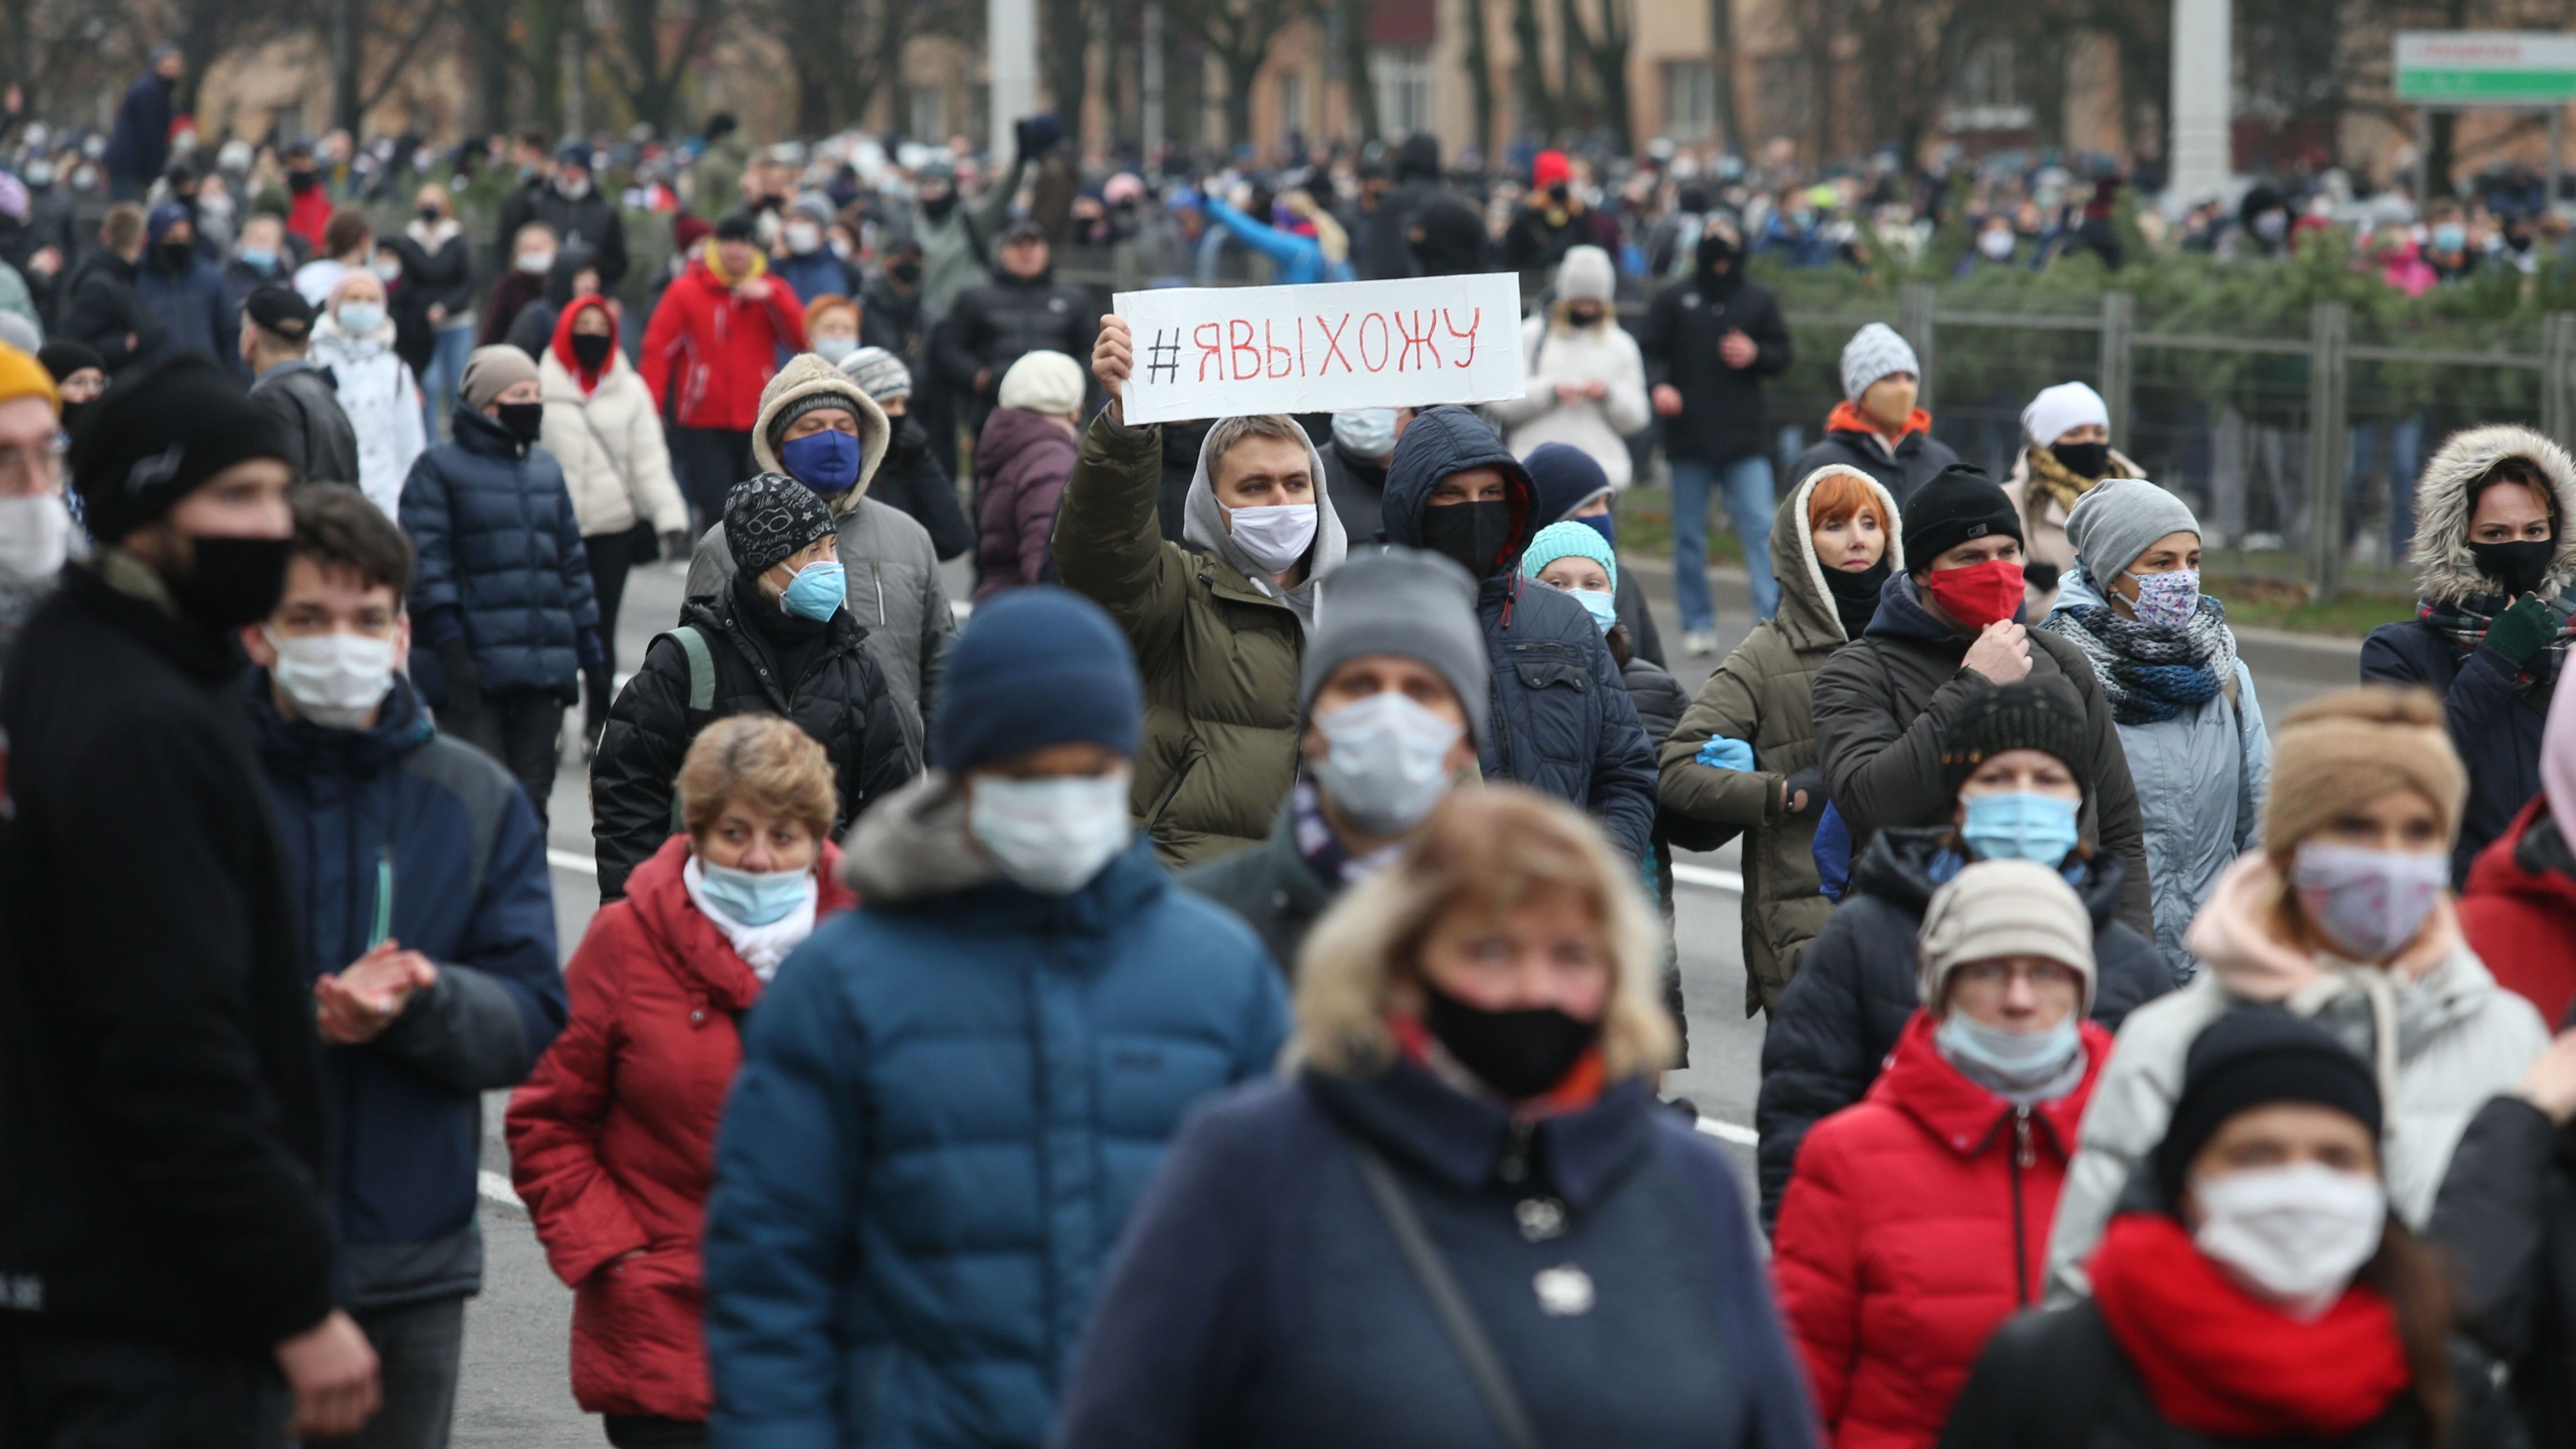 Belarus opposition supporters wearing face masks attend a rally to protest against the Belarus presidential election results in Minsk, on November 15.